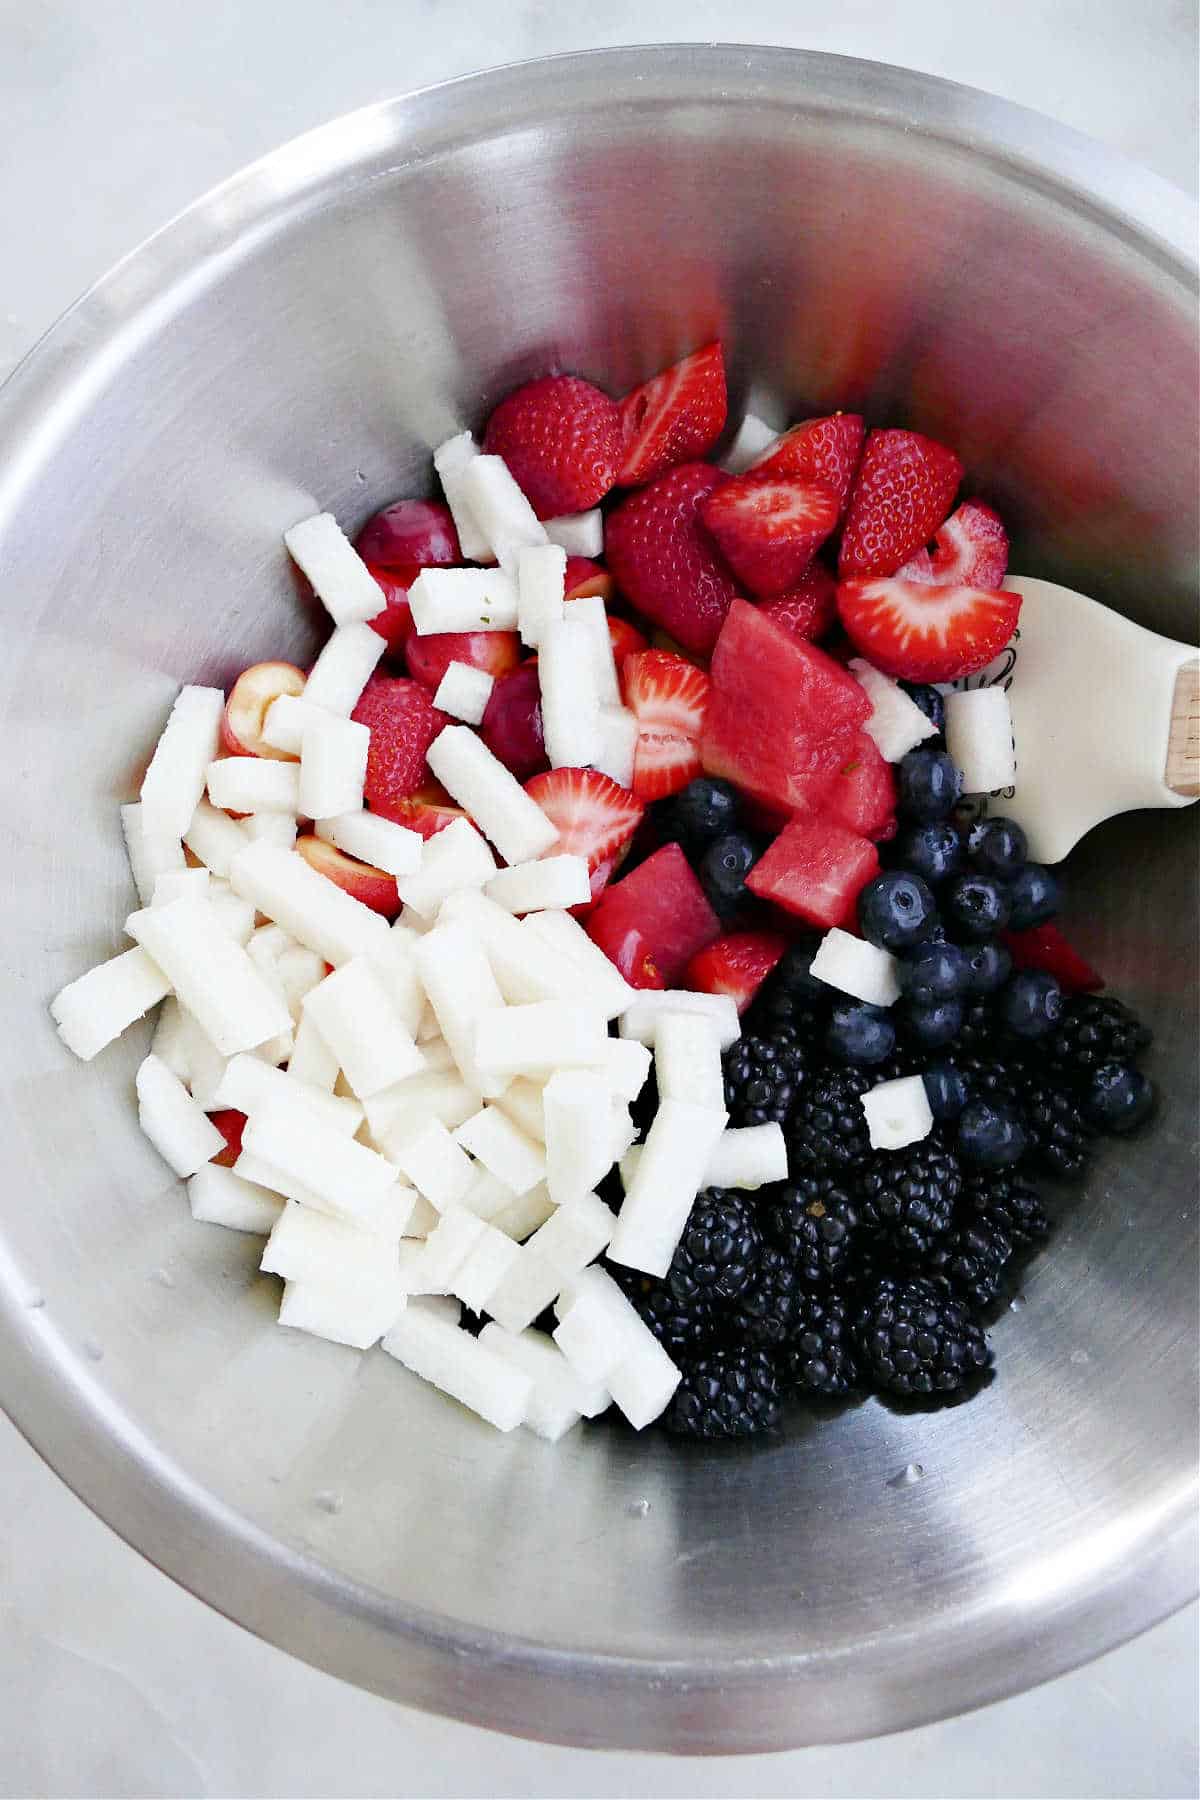 chopped watermelon, berries, and jicama in a mixing bowl with a rubber spatula